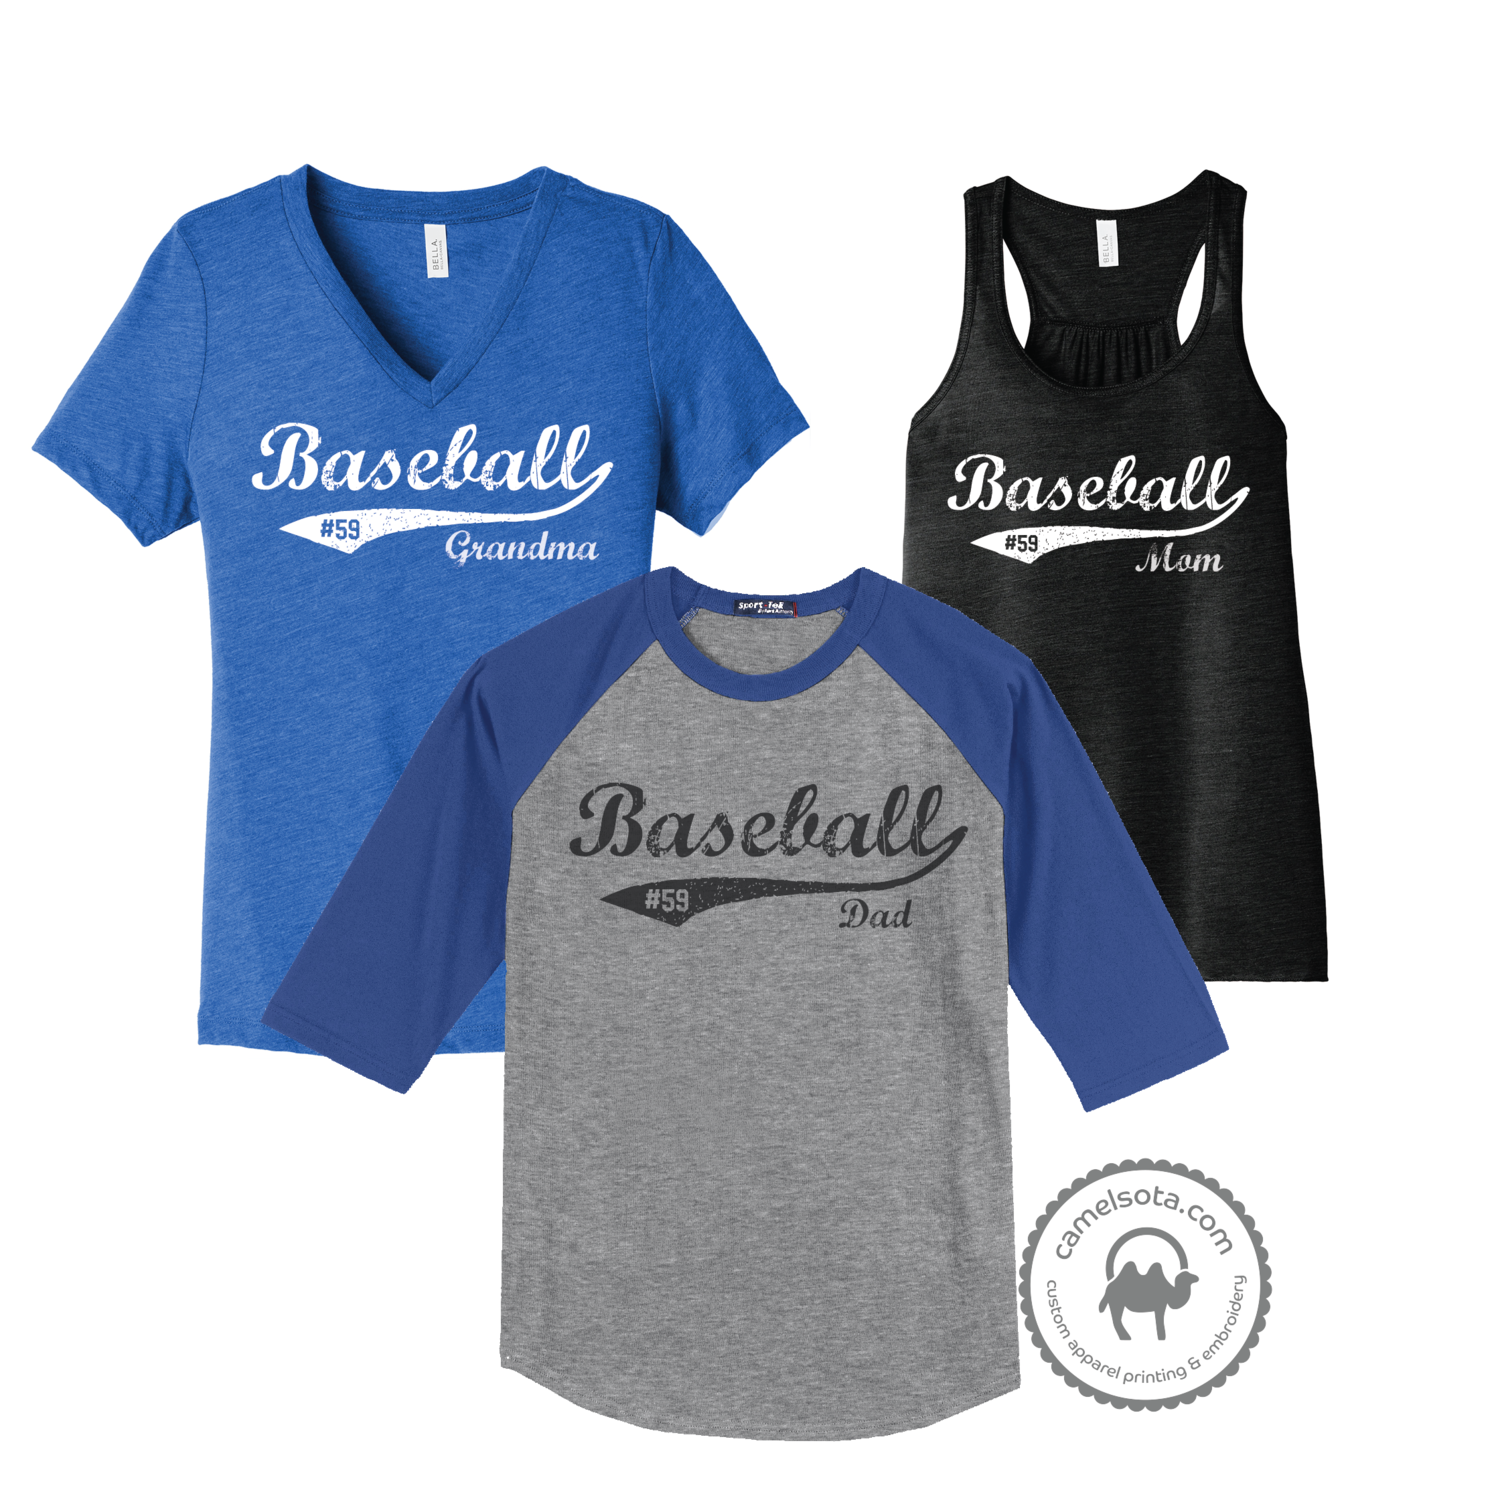 Baseball Design Customizable with Your Number